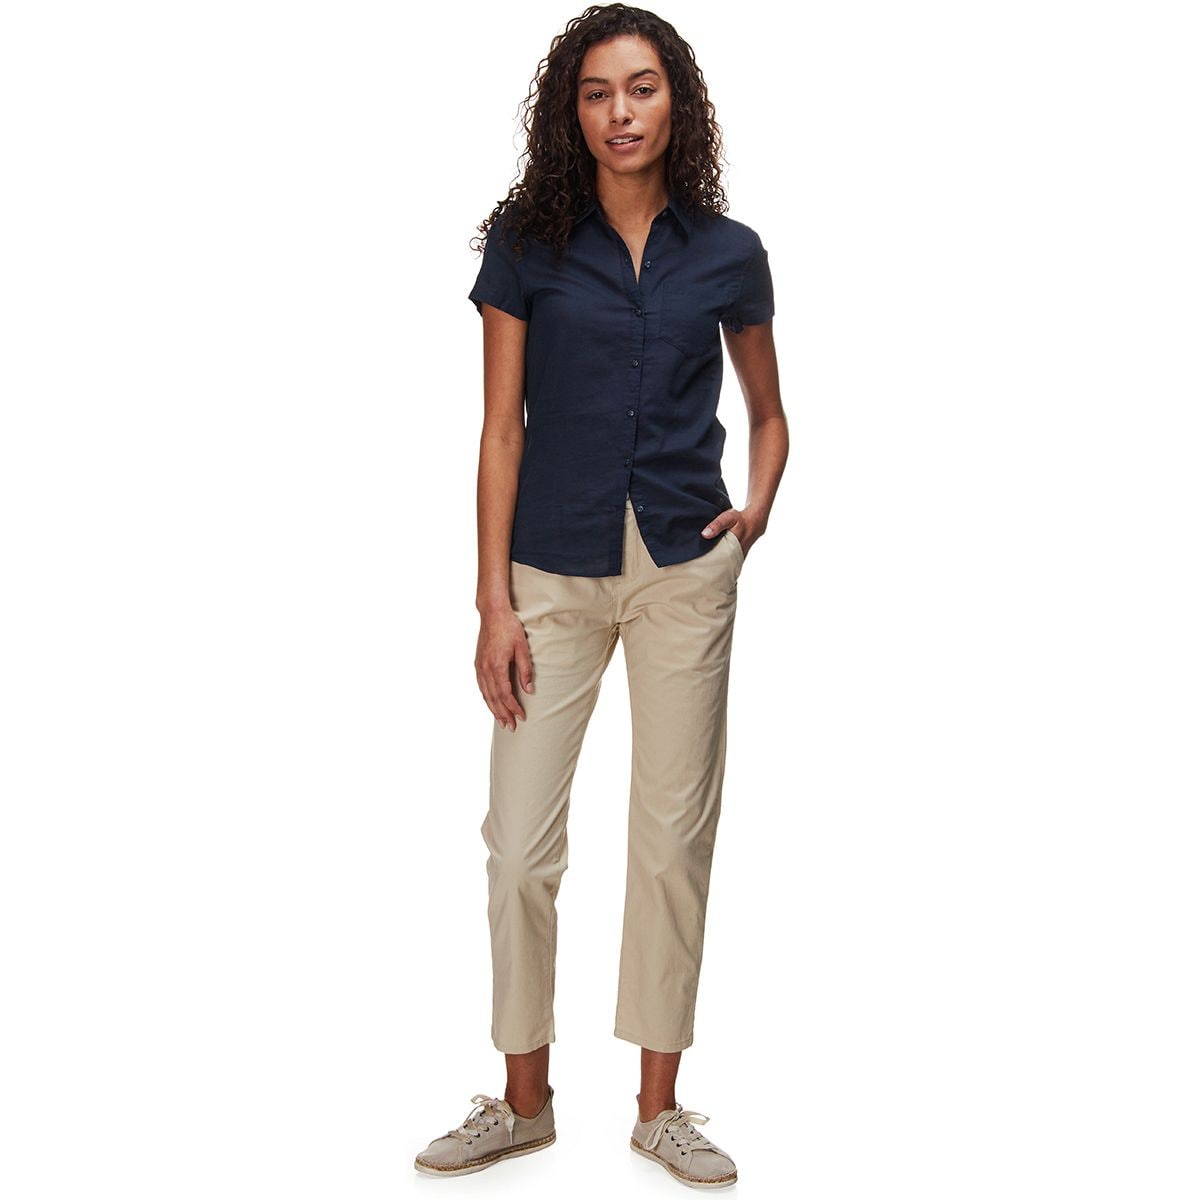 Patagonia Stretch All-Wear Cropped Pant - Women's - Clothing